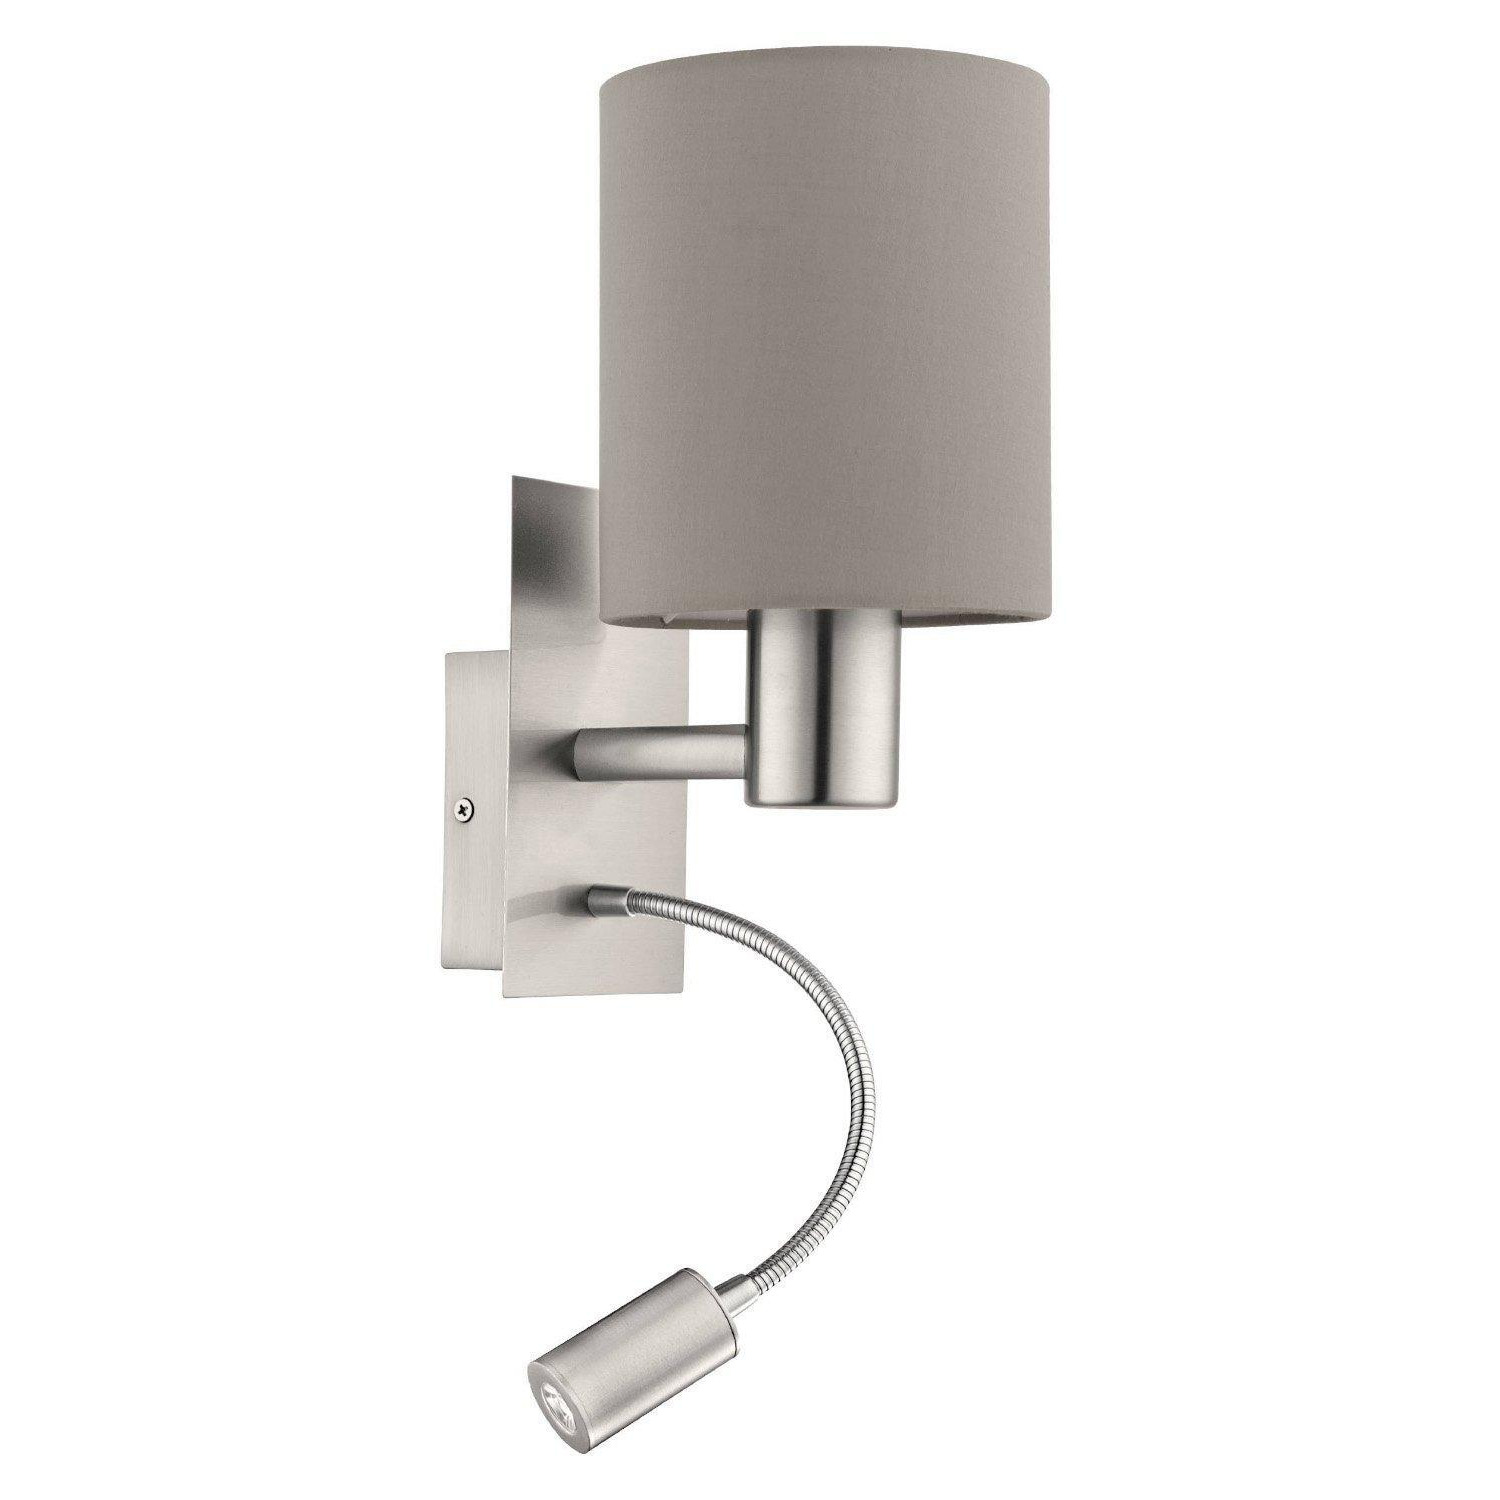 Pasteri Satin Nickel Metal And Fabric Wall Light With Integrated LED Adjustable Reading Light - image 1